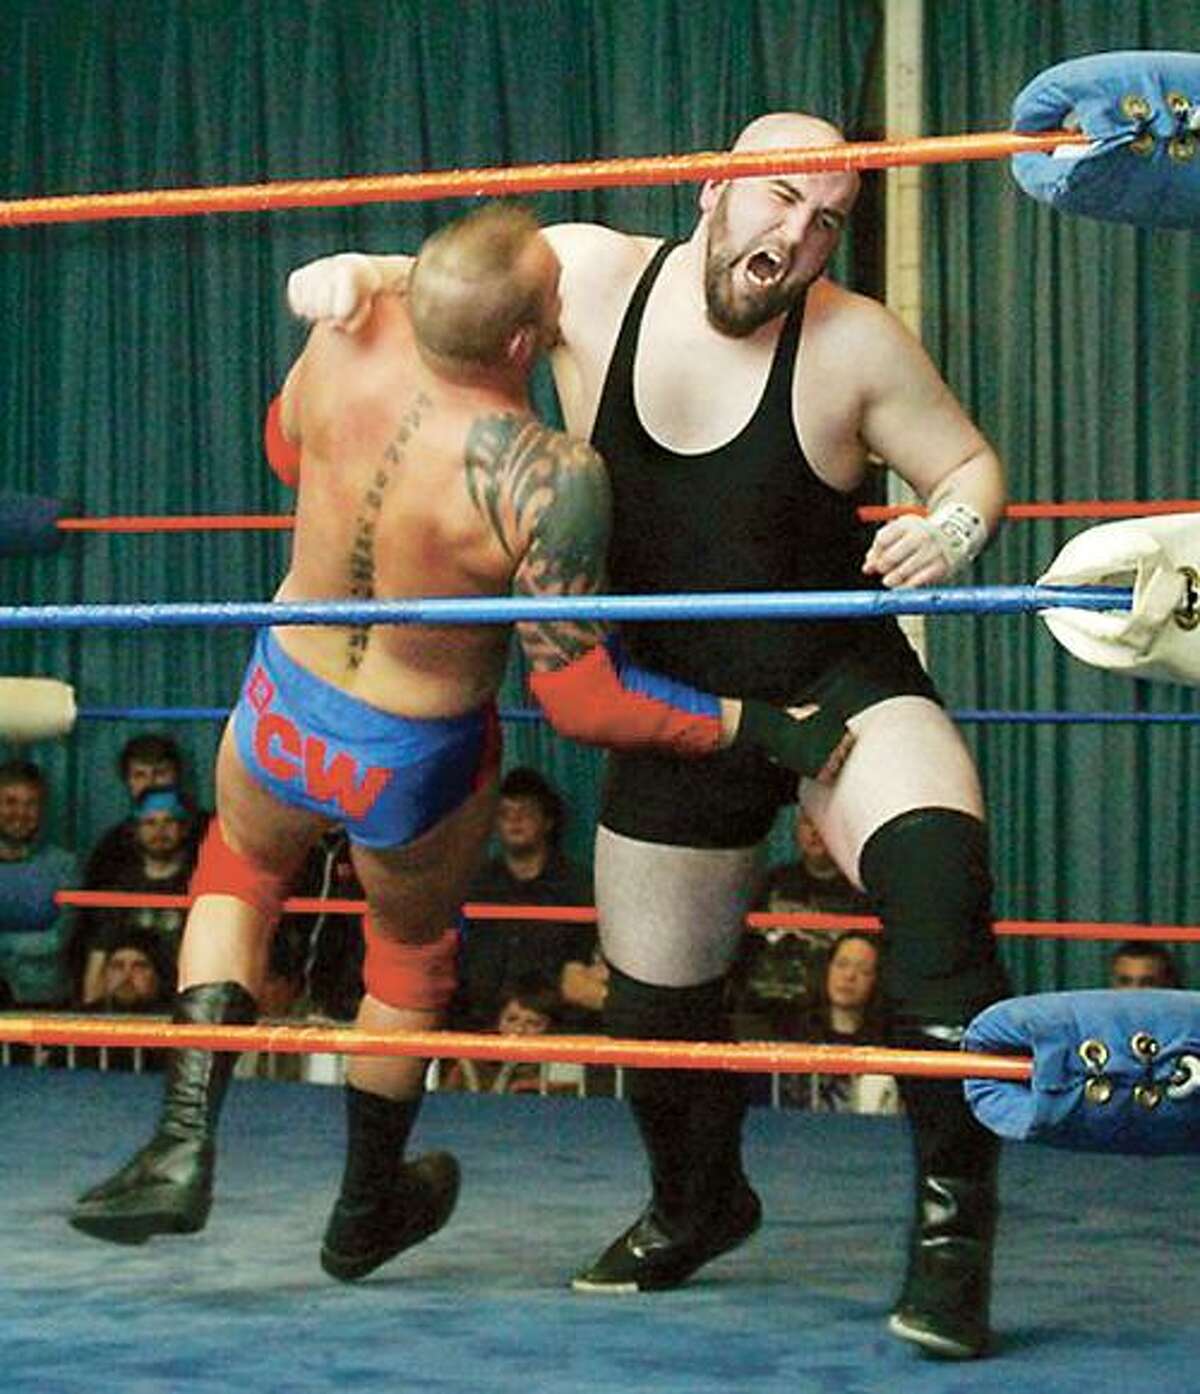 SUBMITTED PHOTO Oneida native Mike "Punisher" VanSlyke will compete in the "Rome is Burning" wrestling event Friday, Sept. 16, 2011.